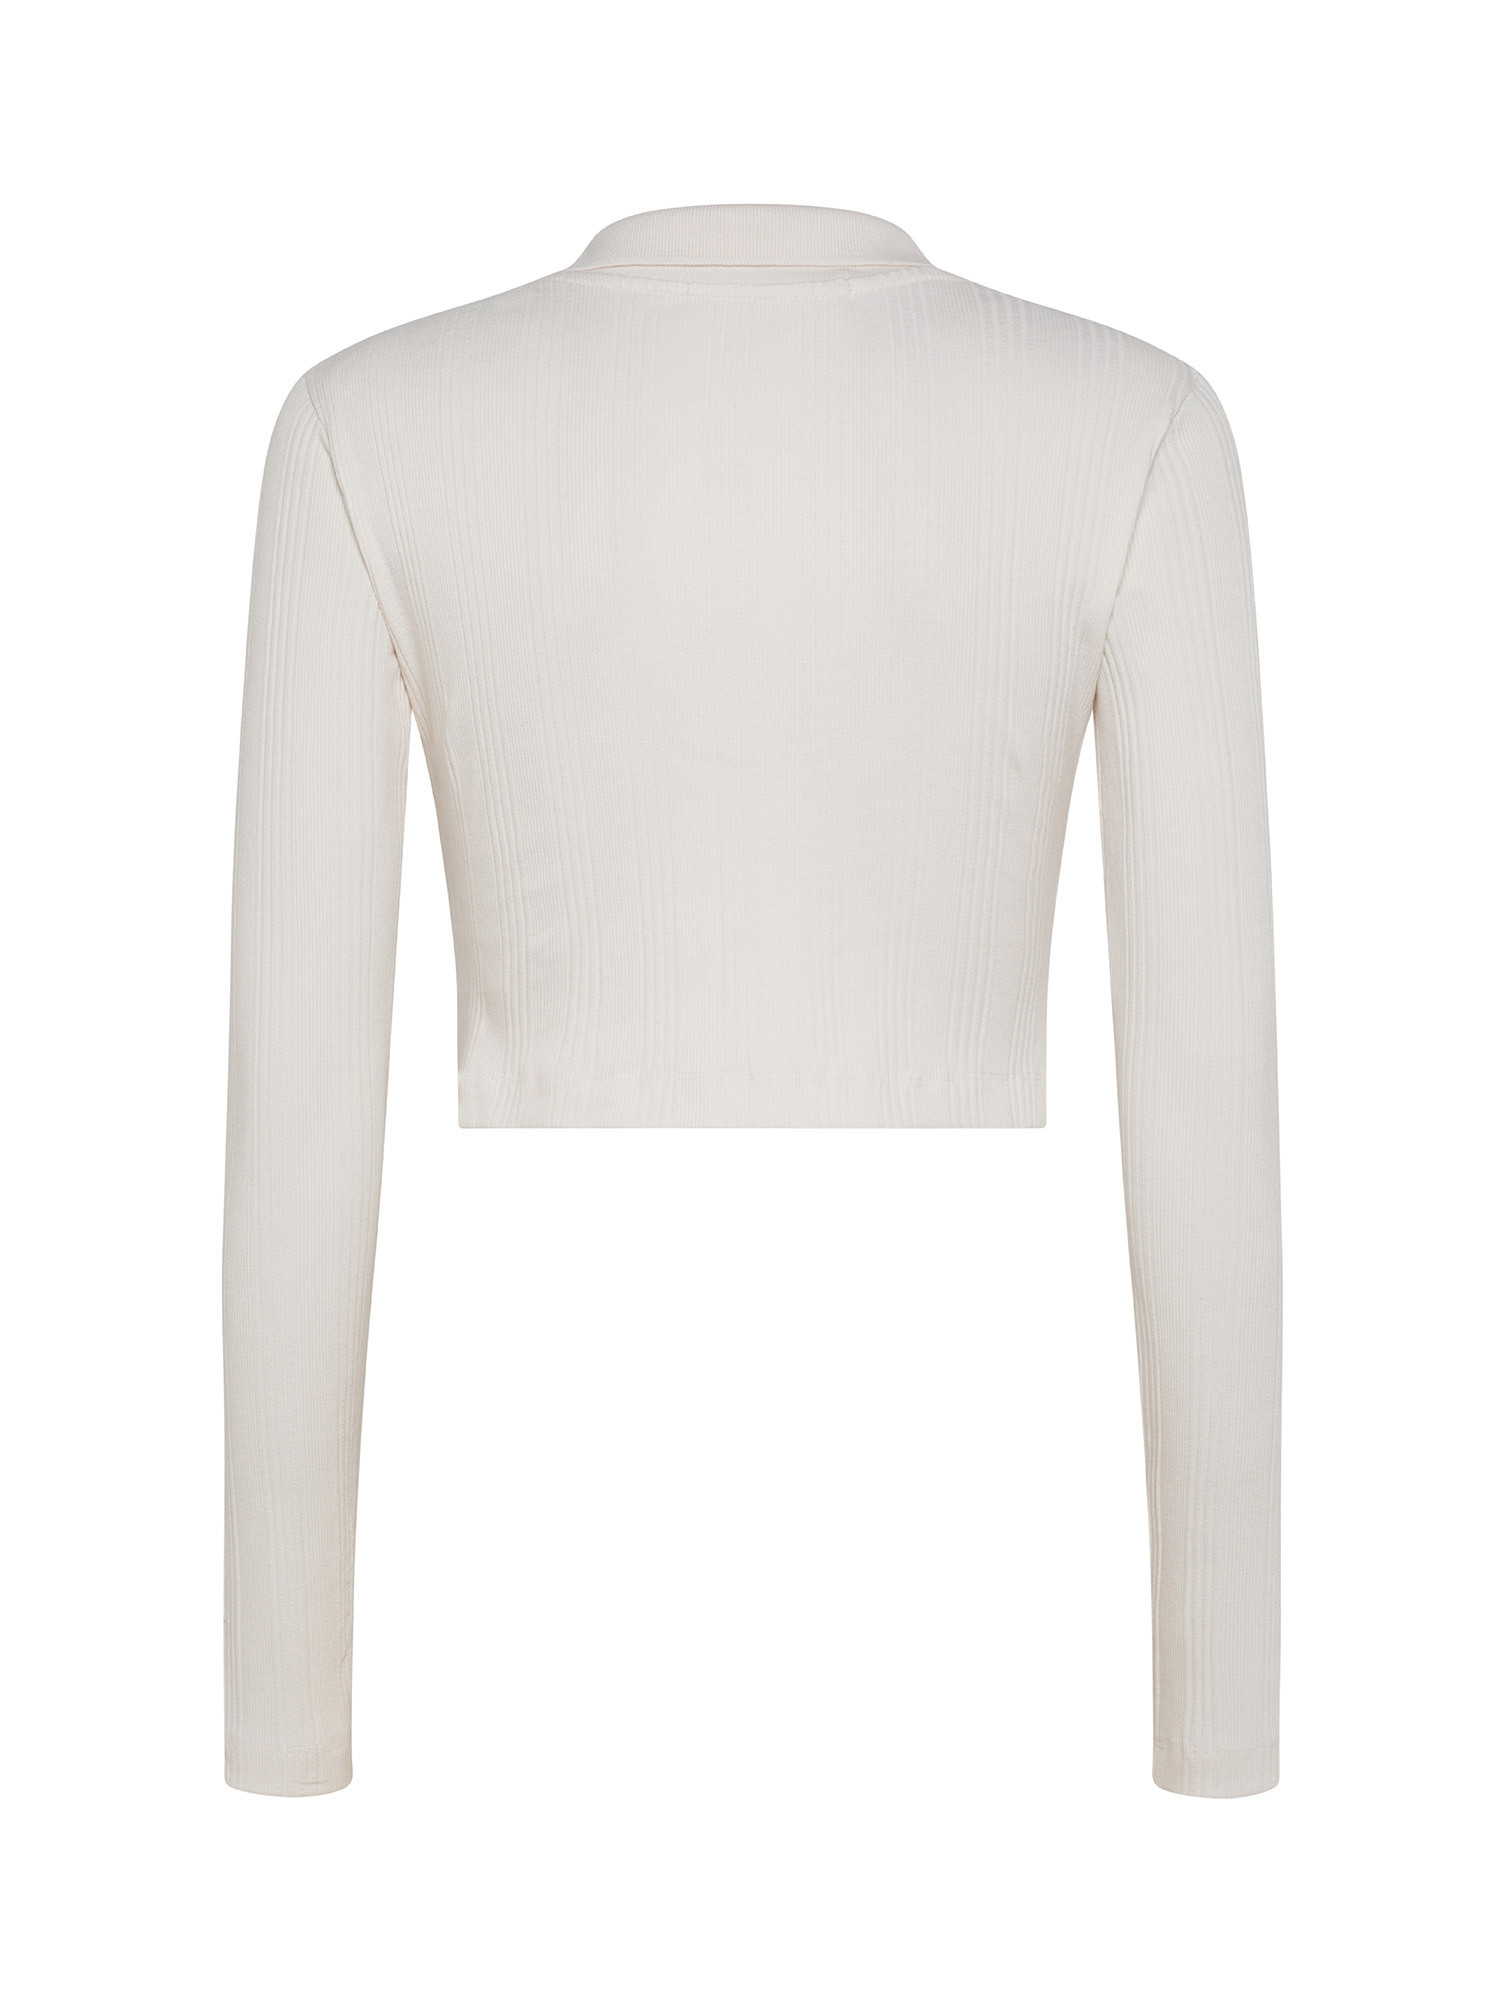 Calvin Klein Jeans - Ribbed sweater with logo, White Ivory, large image number 1